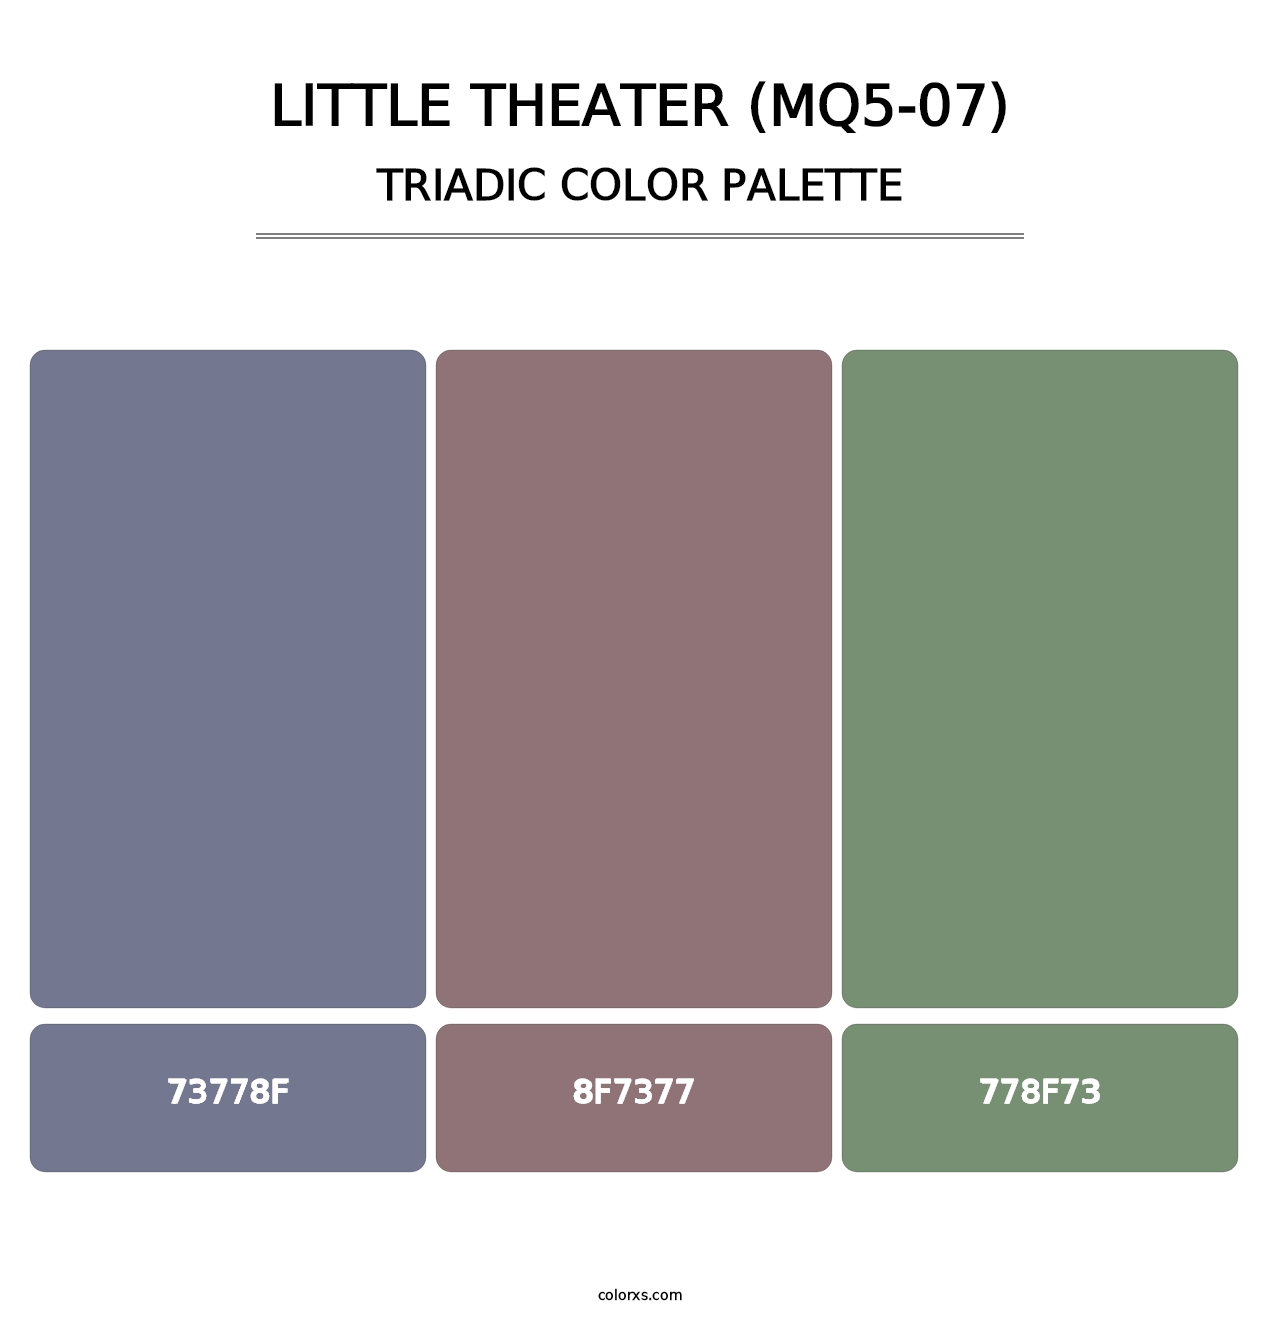 Little Theater (MQ5-07) - Triadic Color Palette